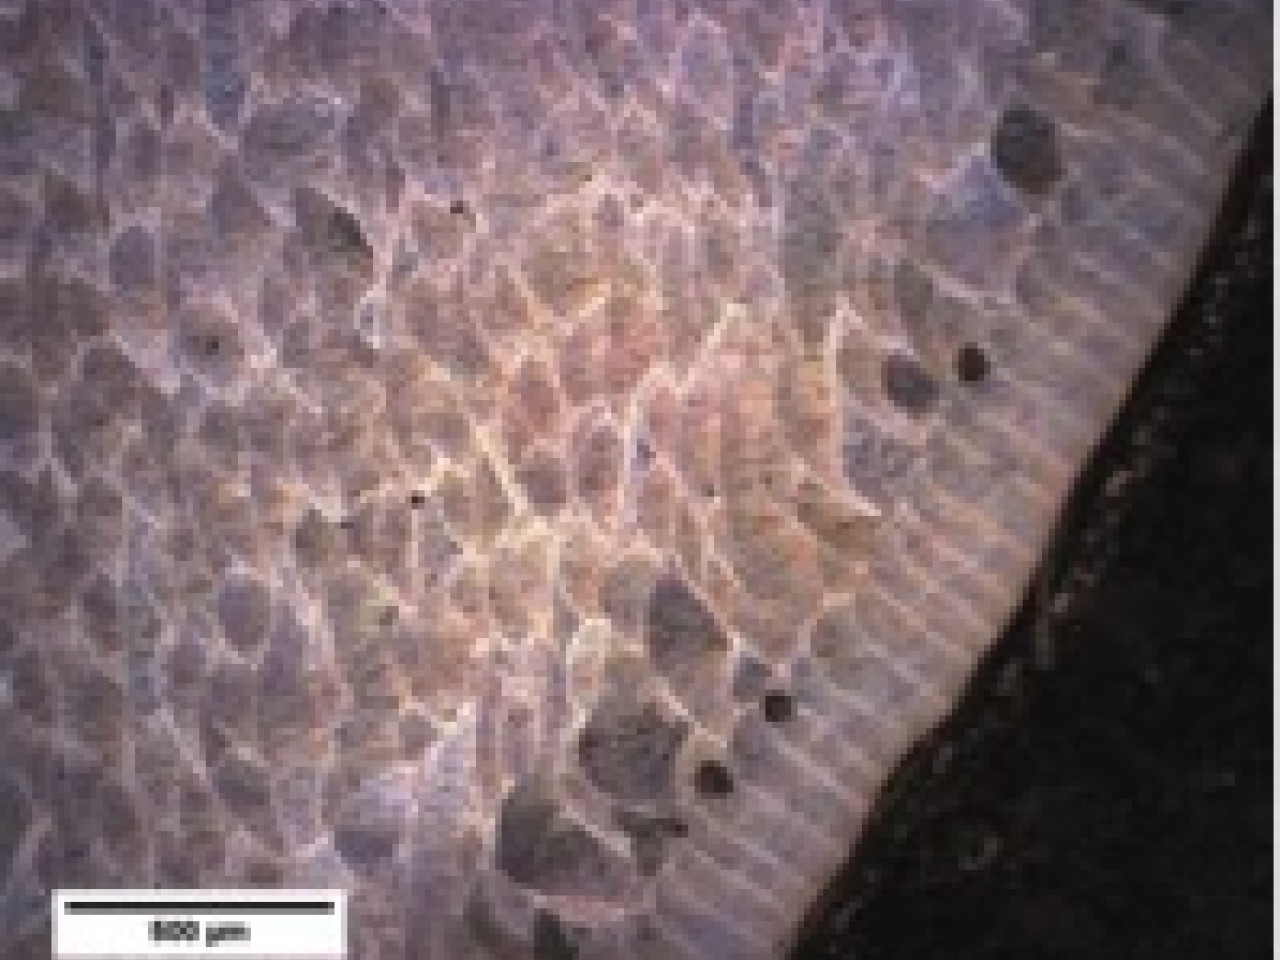 Low-magnification image (optical microscope) of the microstructure of the AlSi10Mg alloy produced by AM